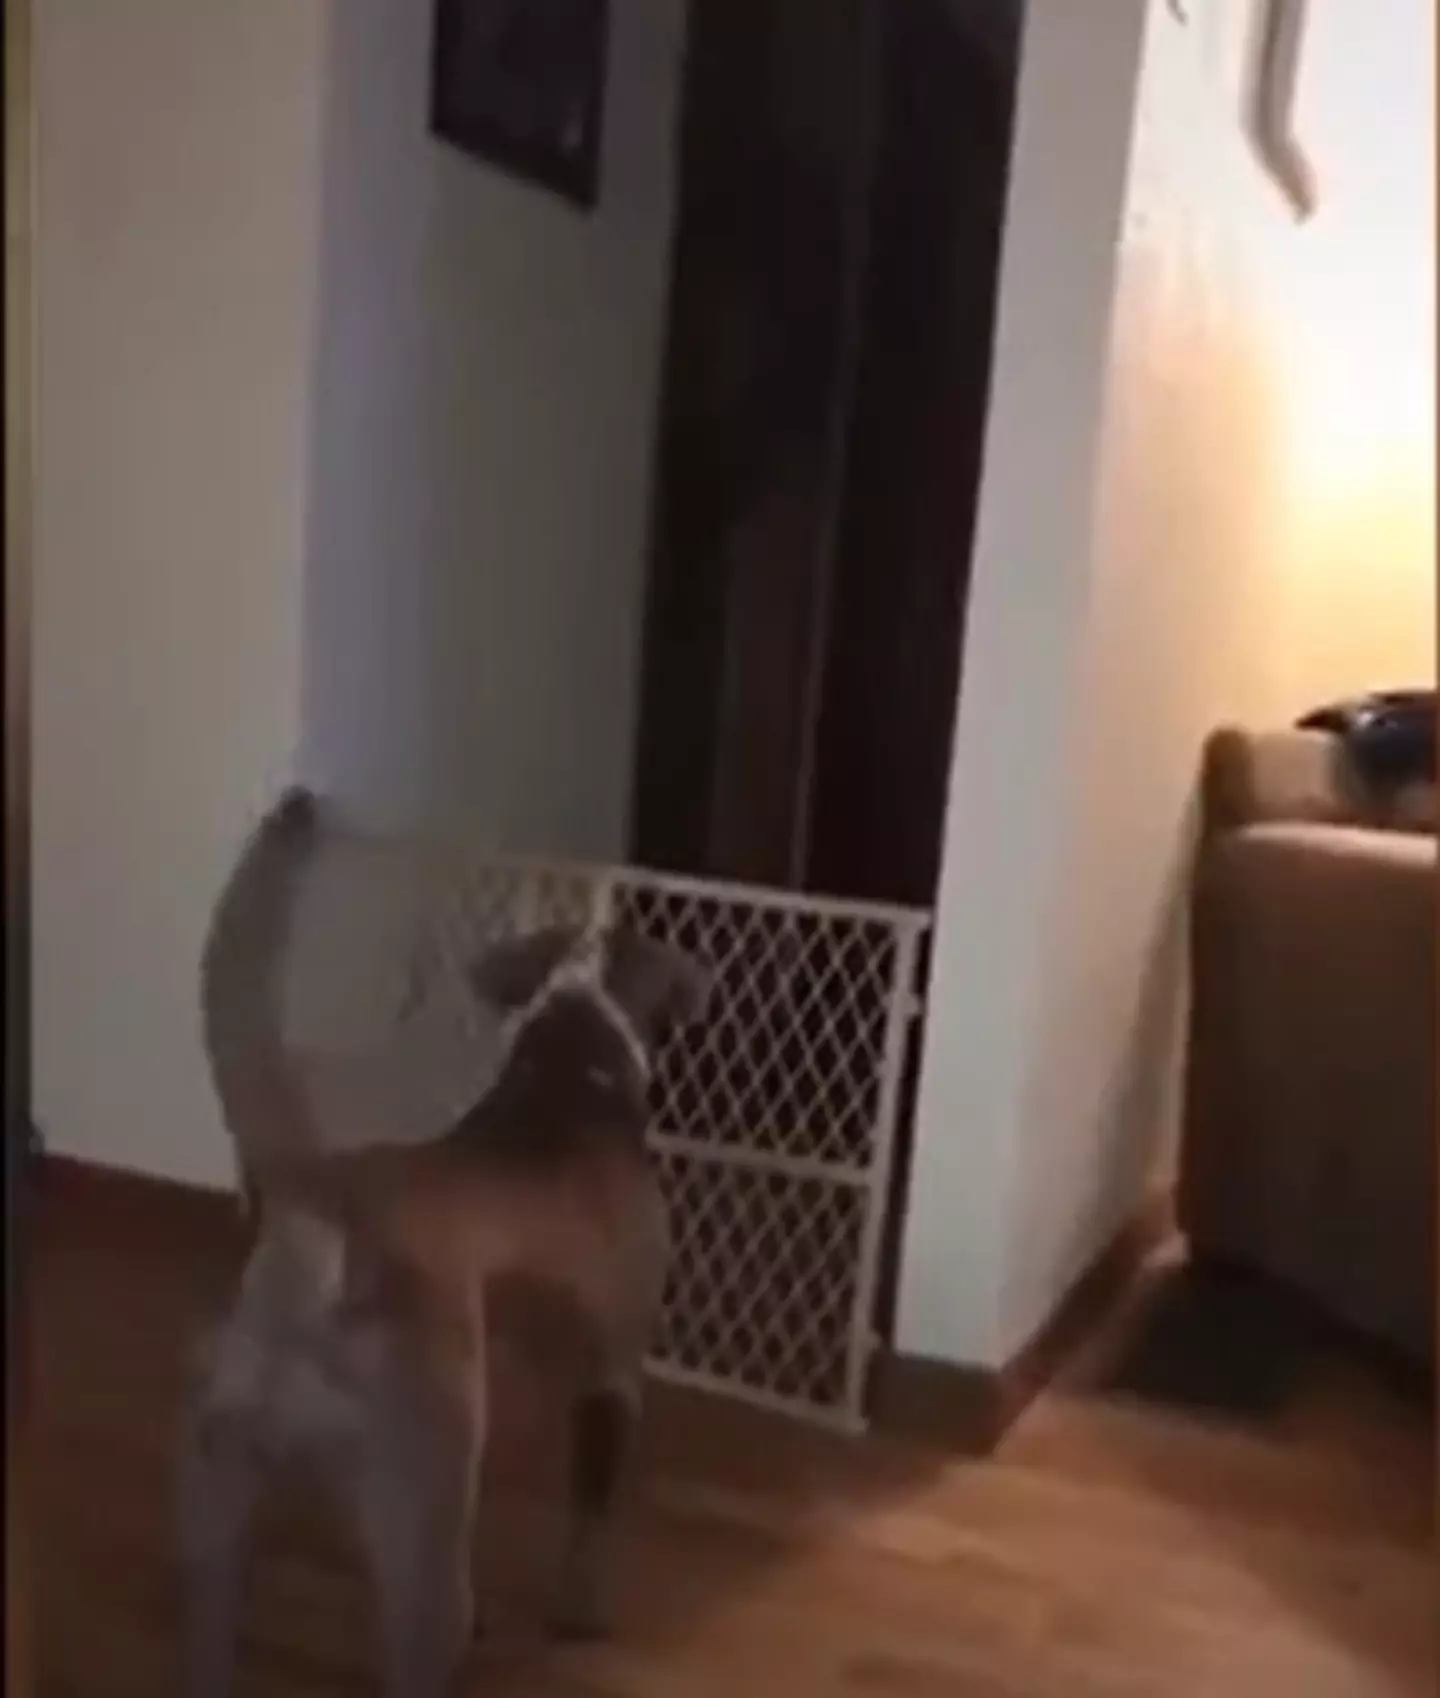 What does the dog see?